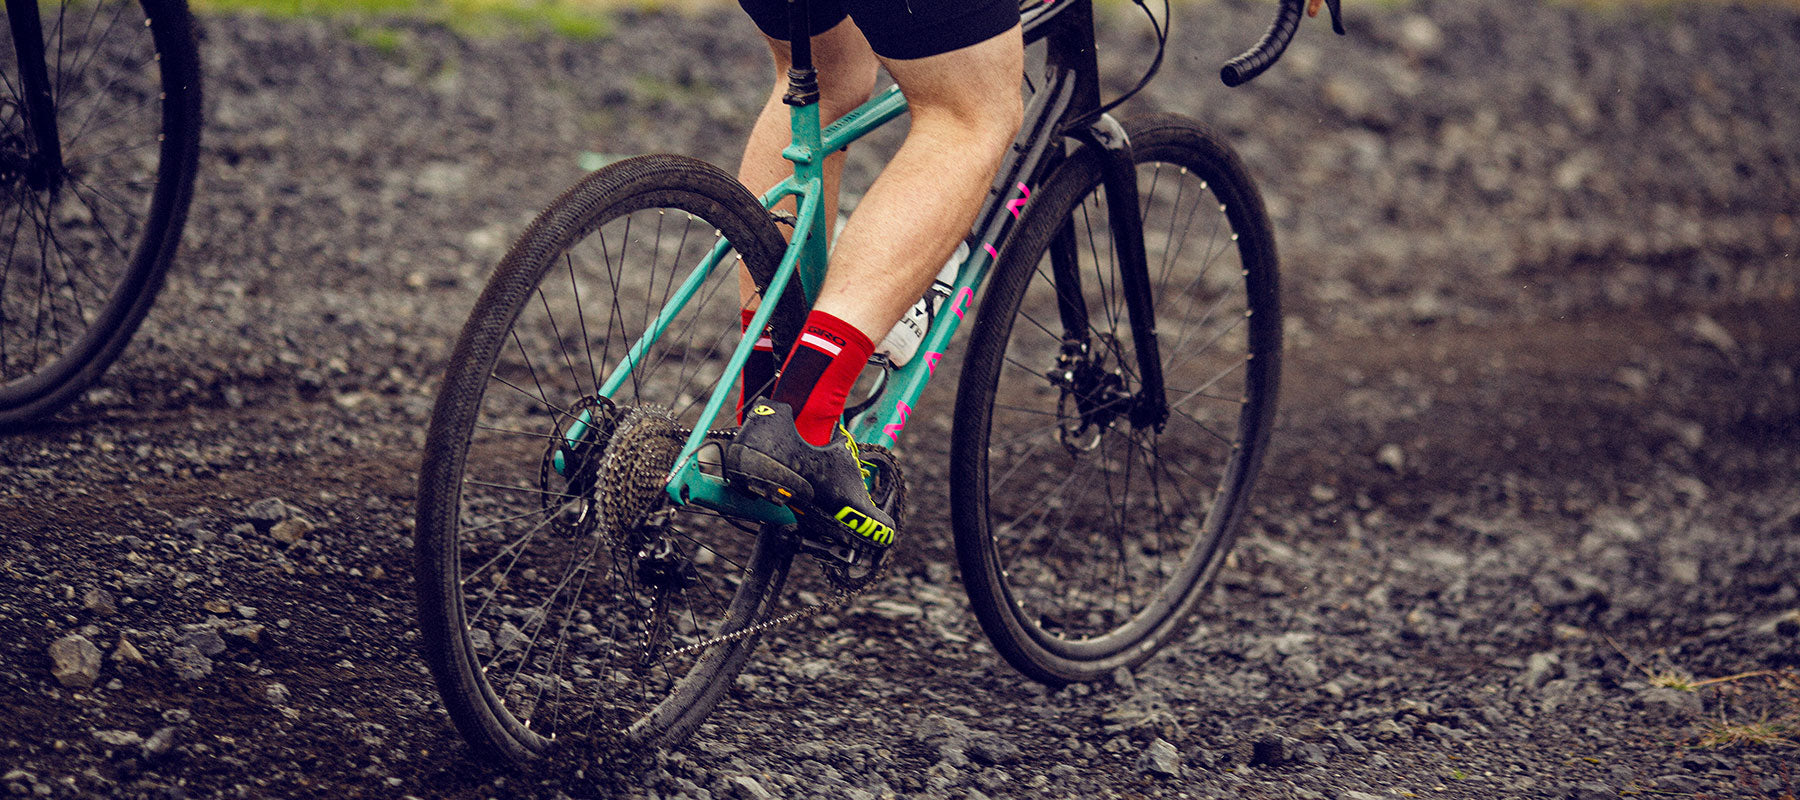 GovVelo offers a variety of road and gravel bikes